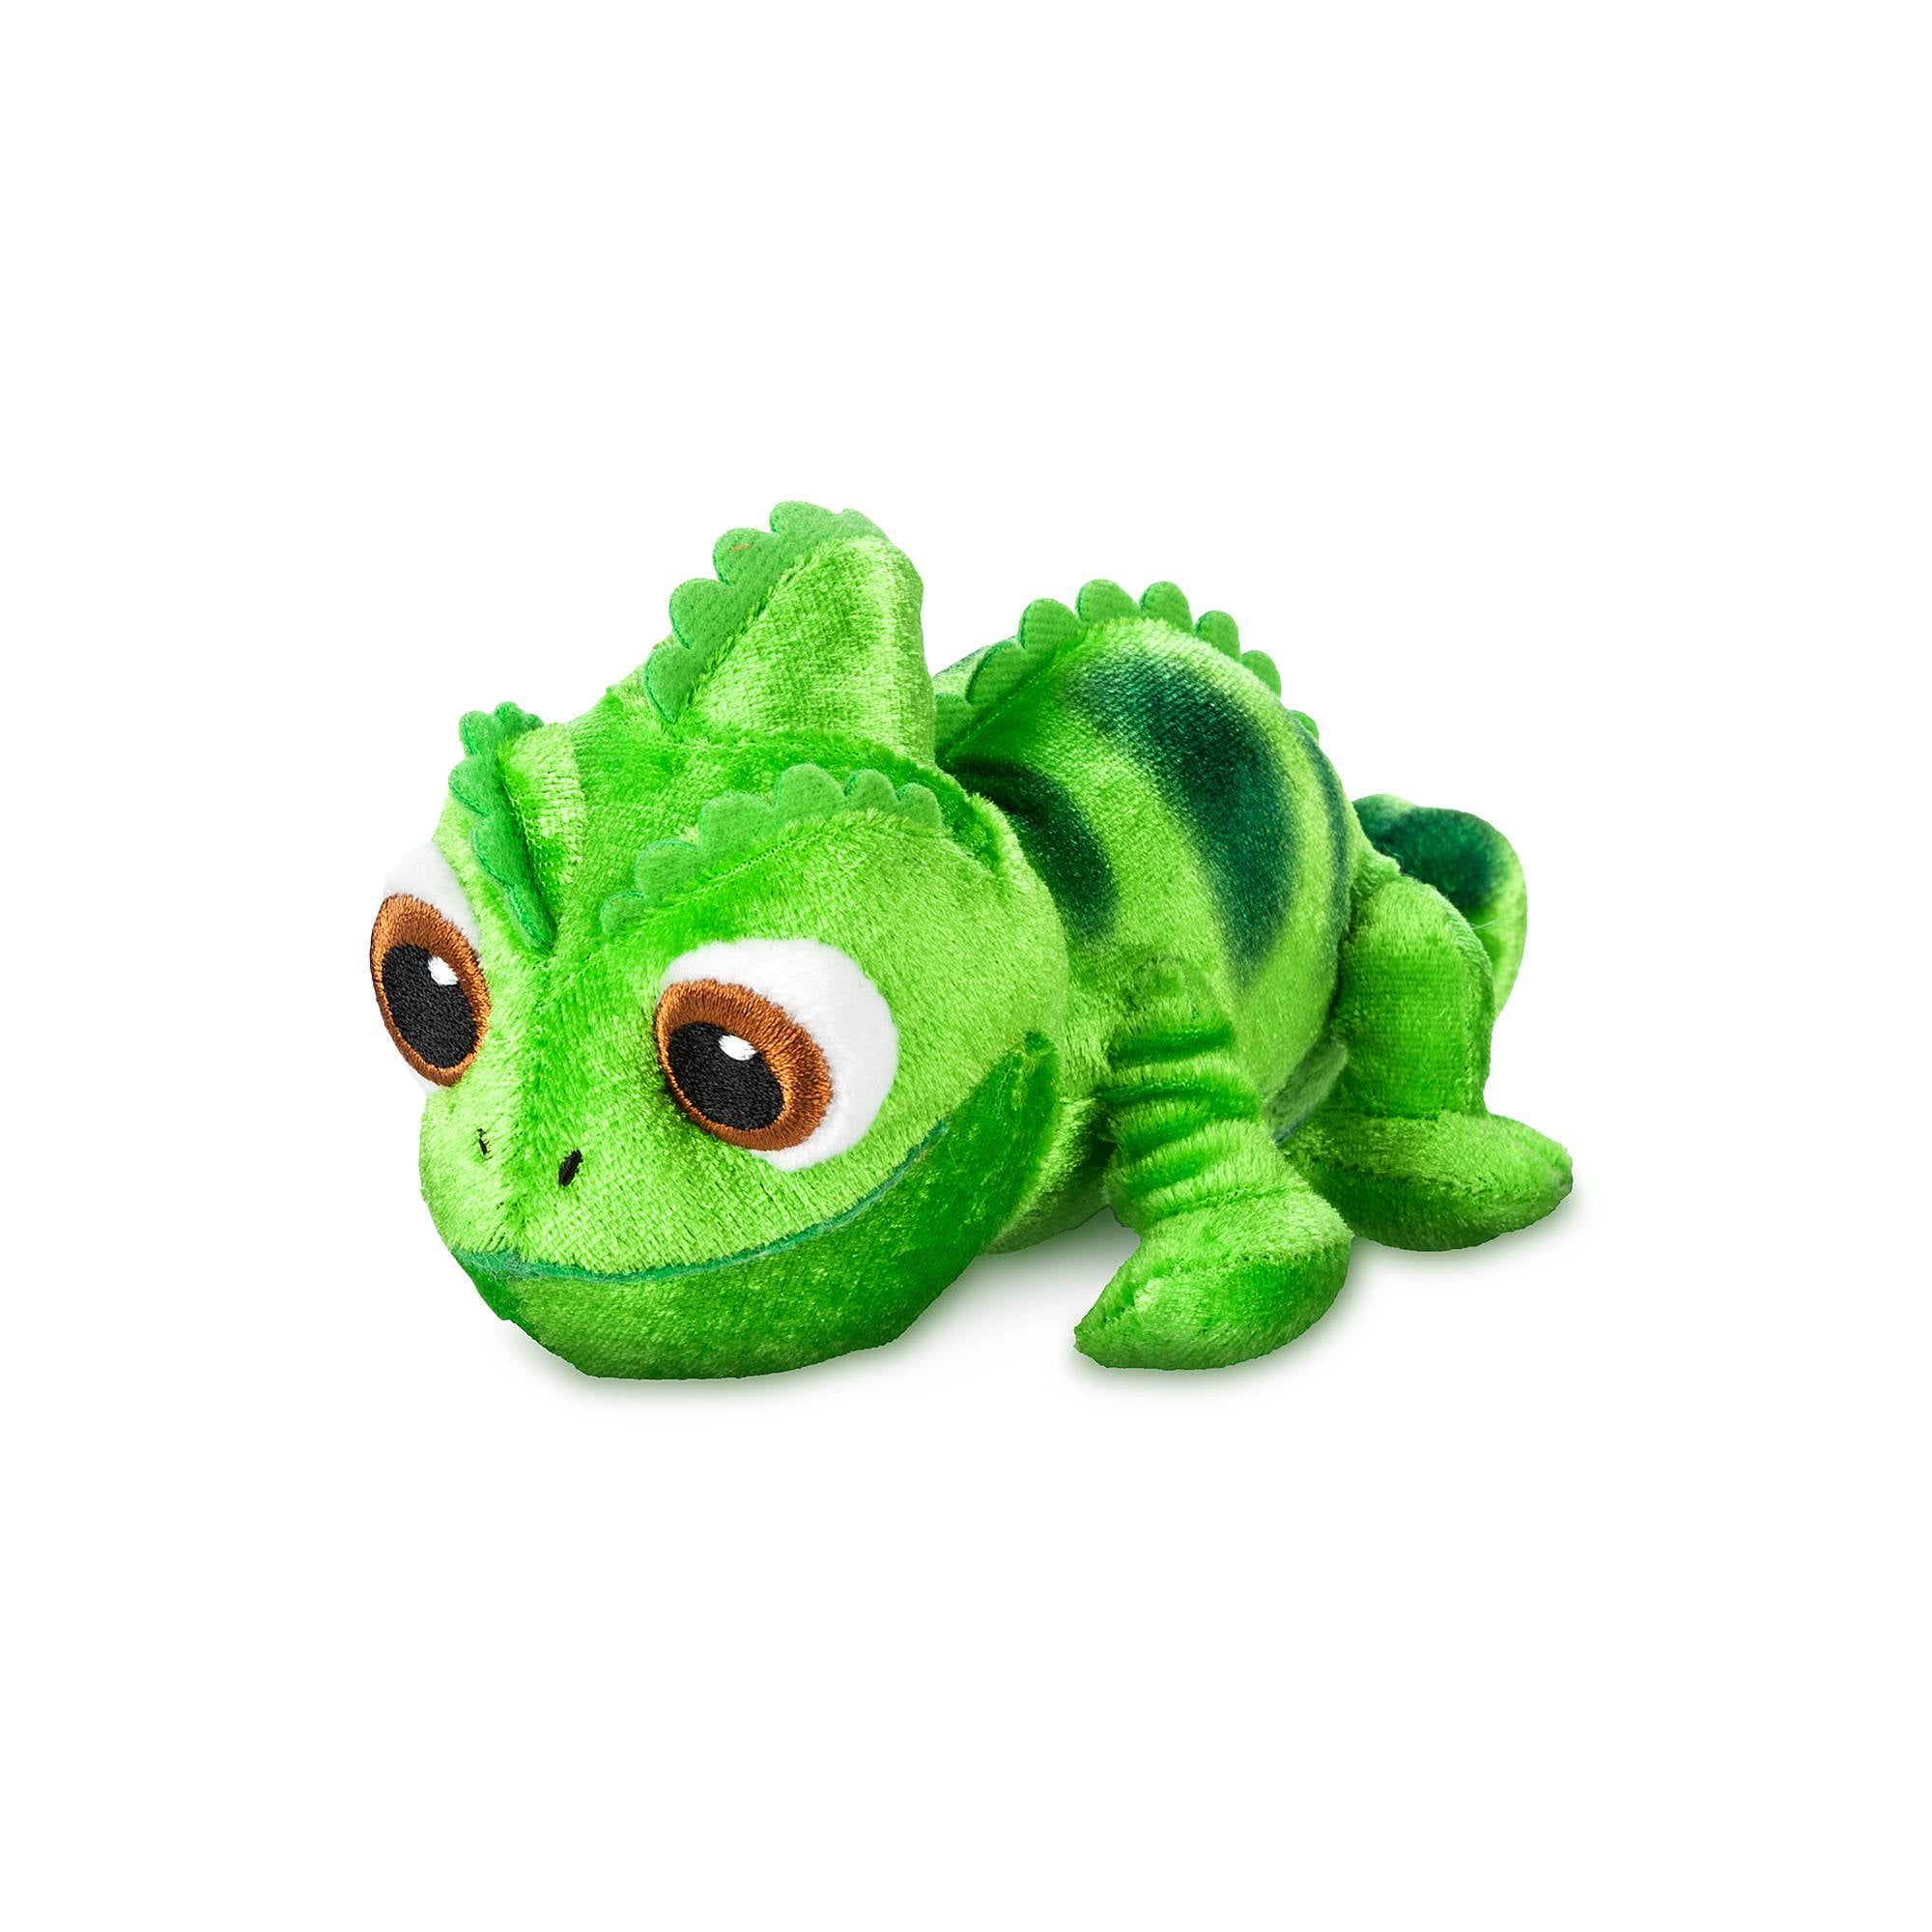 NEW OFFICIAL 8" DISNEY TANGLED RED PASCAL PLUSH SOFT TOY 